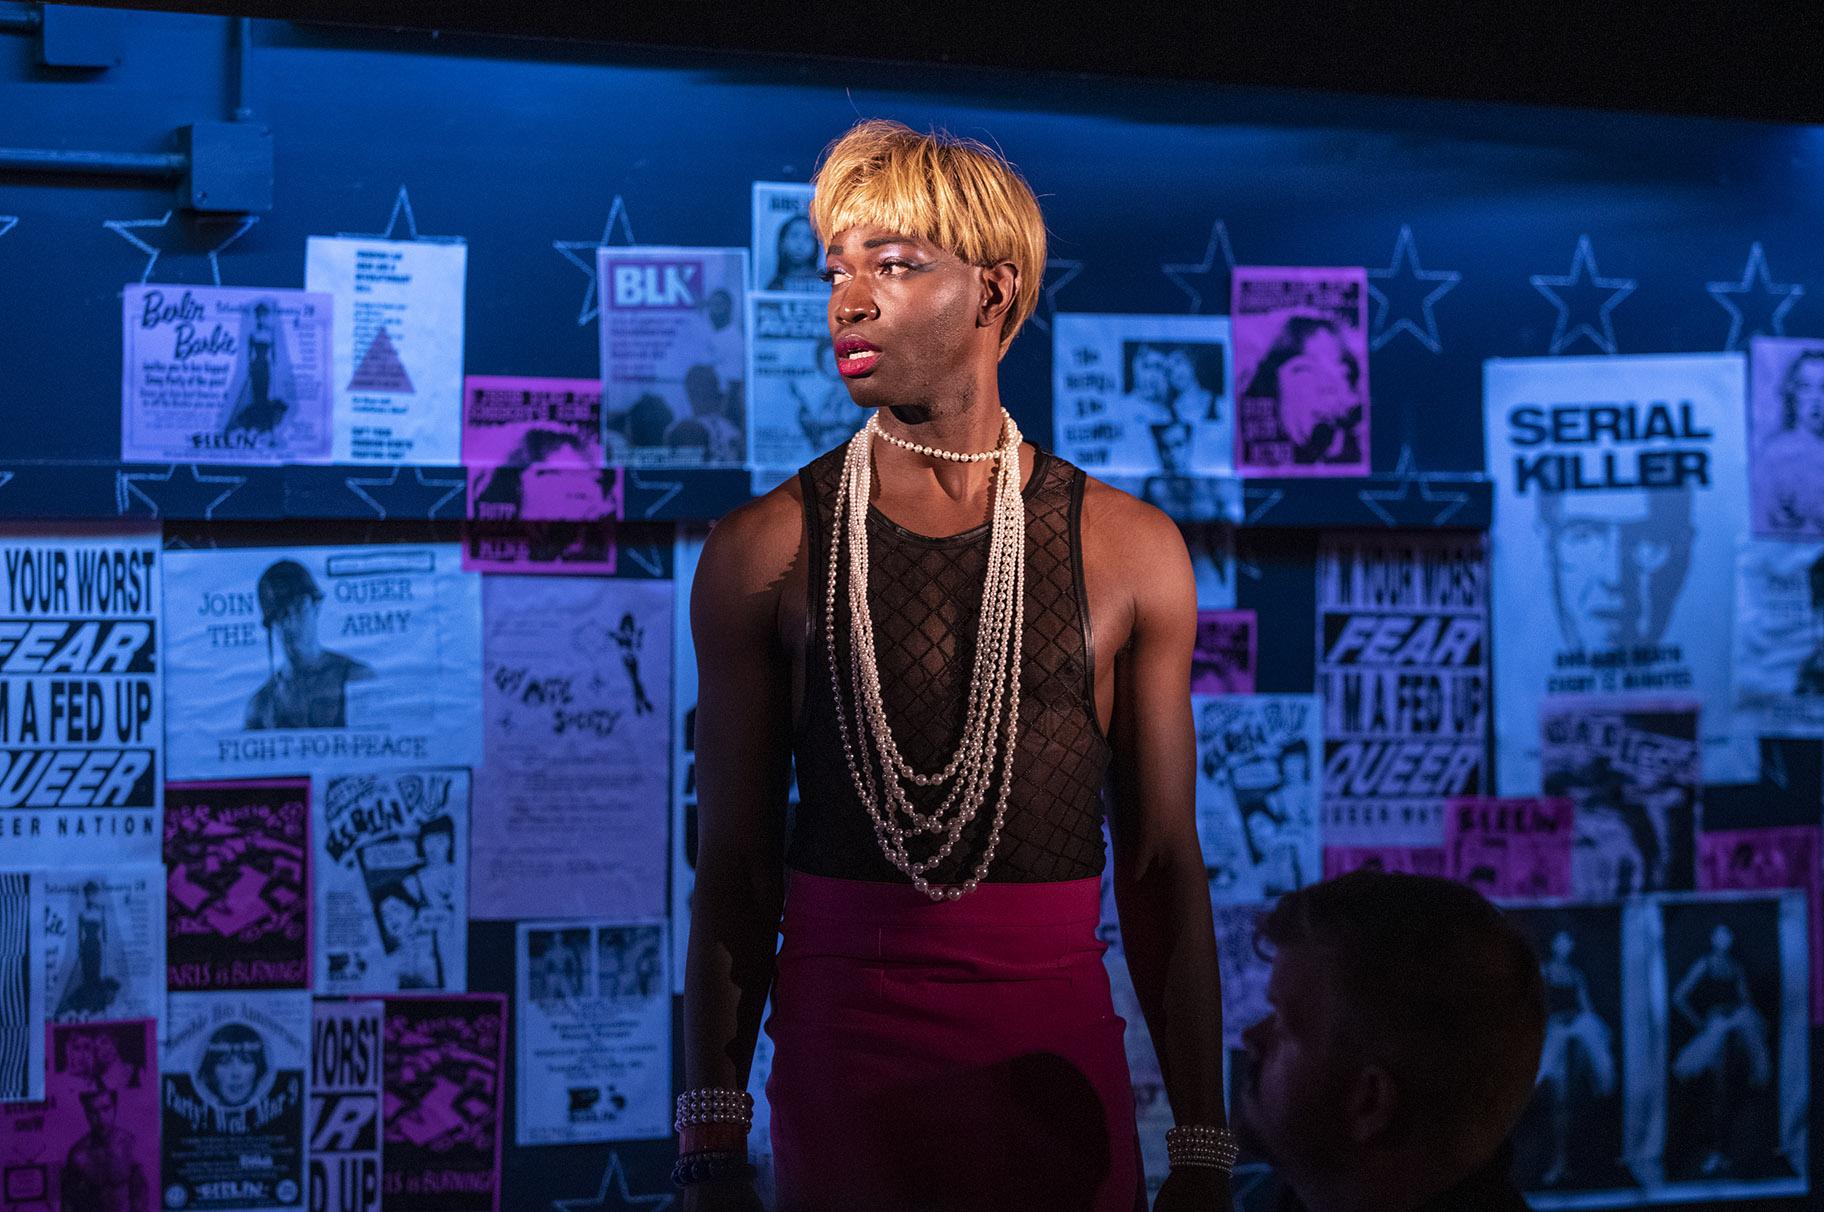 Tarell Alvin McCraney in Steppenwolf’s world premiere production of “Ms. Blakk for President,” co-written by ensemble members Tina Landau and McCraney. (Photo by Michael Brosilow)